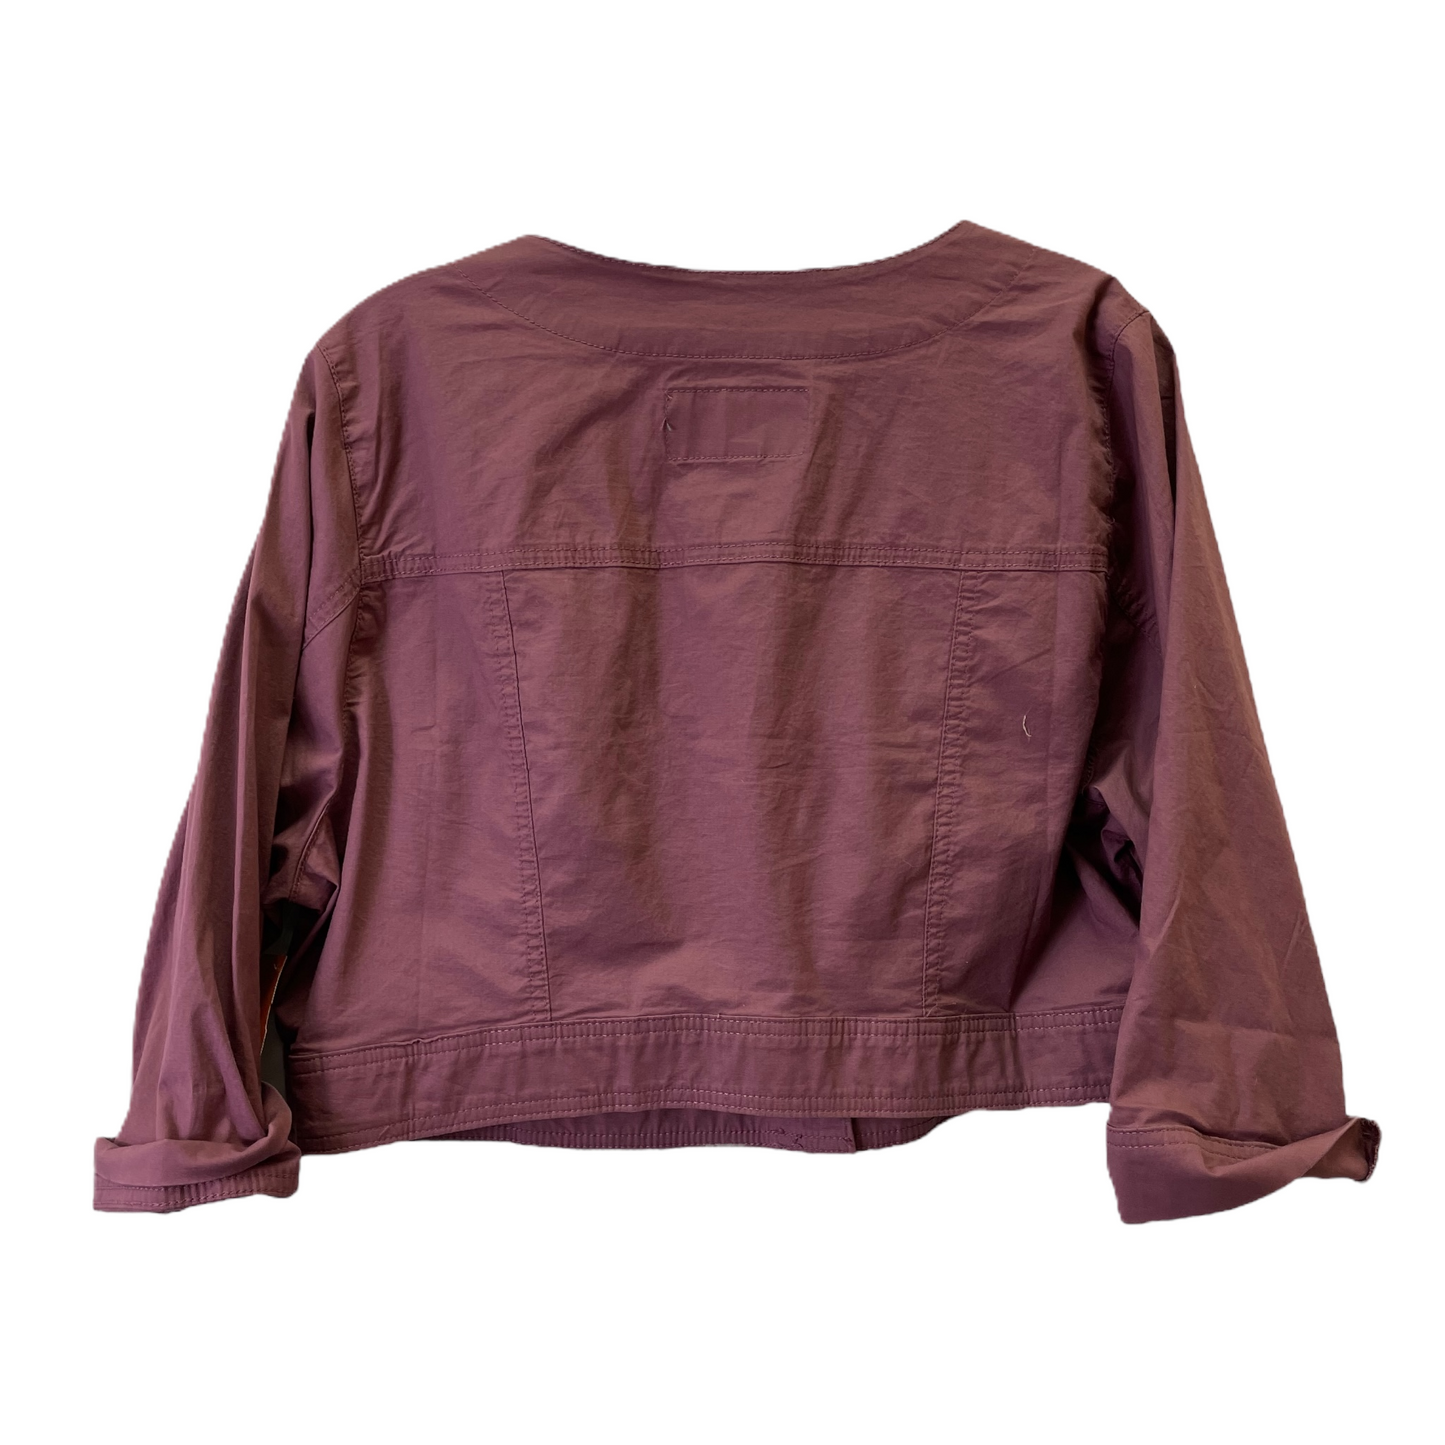 Mauve Jacket Other By Torrid, Size: 1x